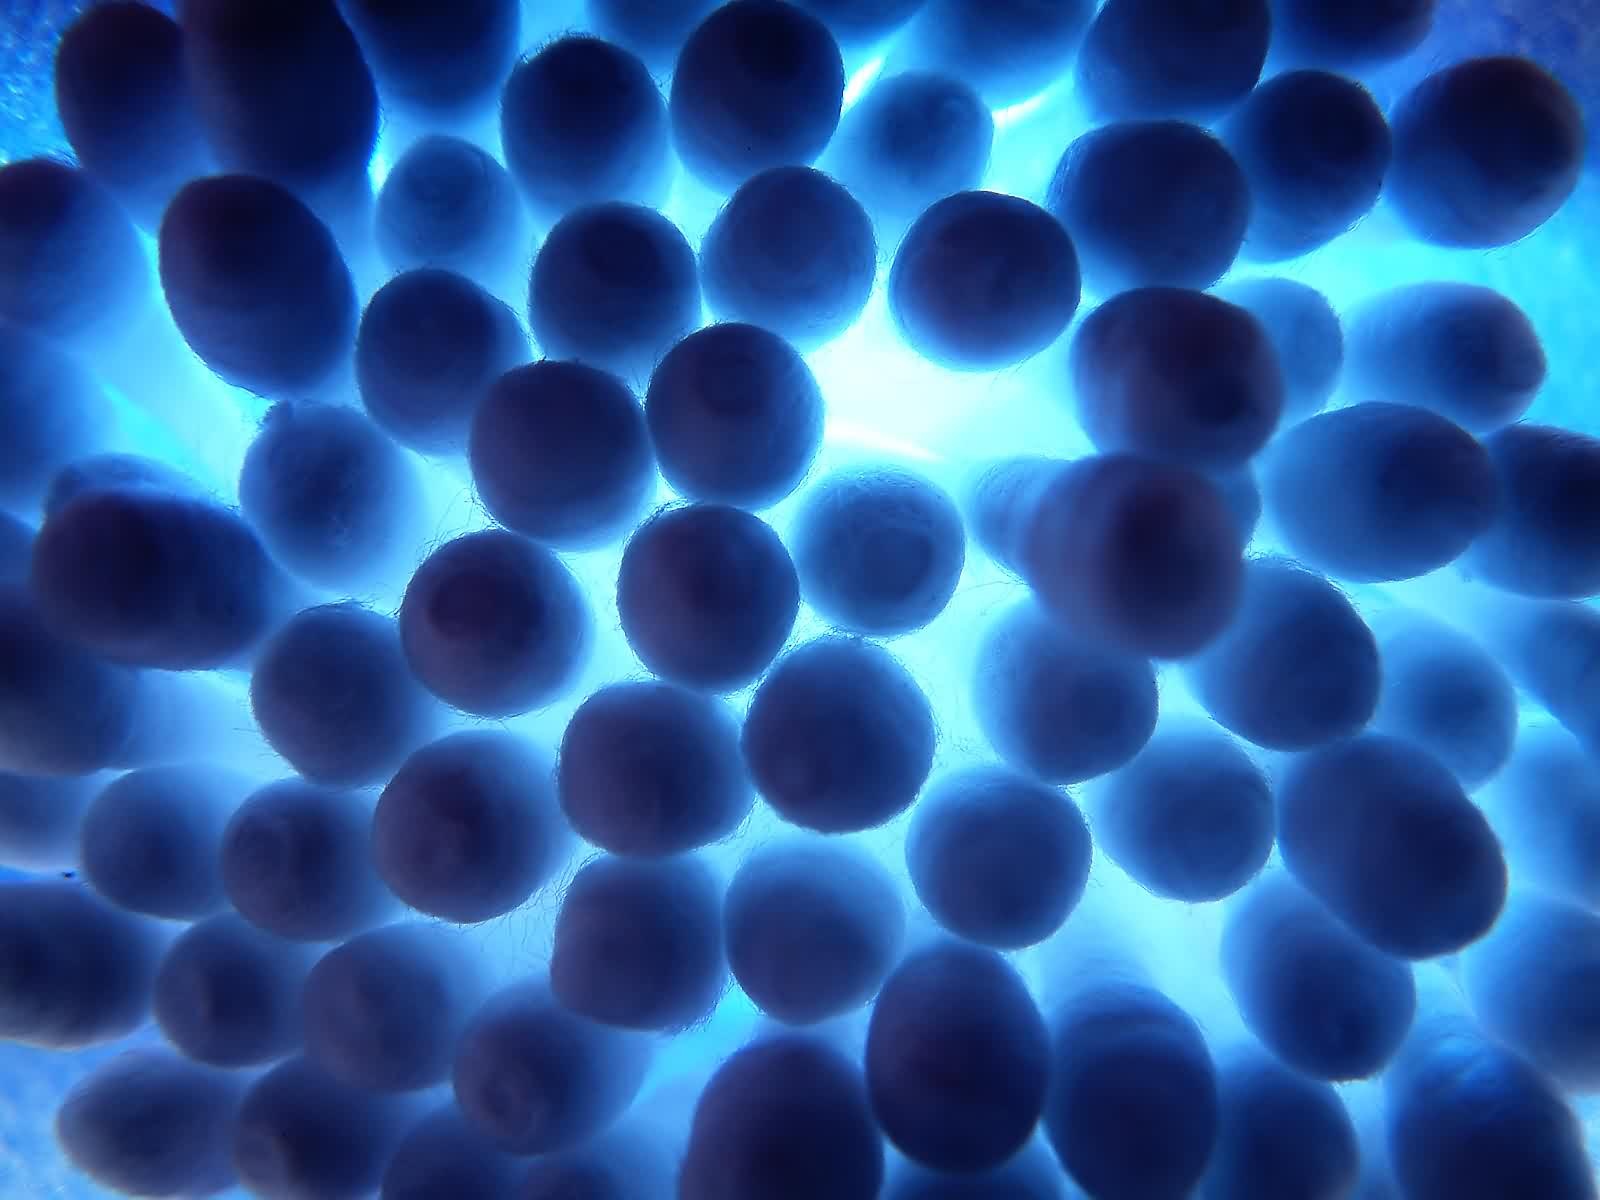 Blue Spores Backgrounds powerpoint backgrounds